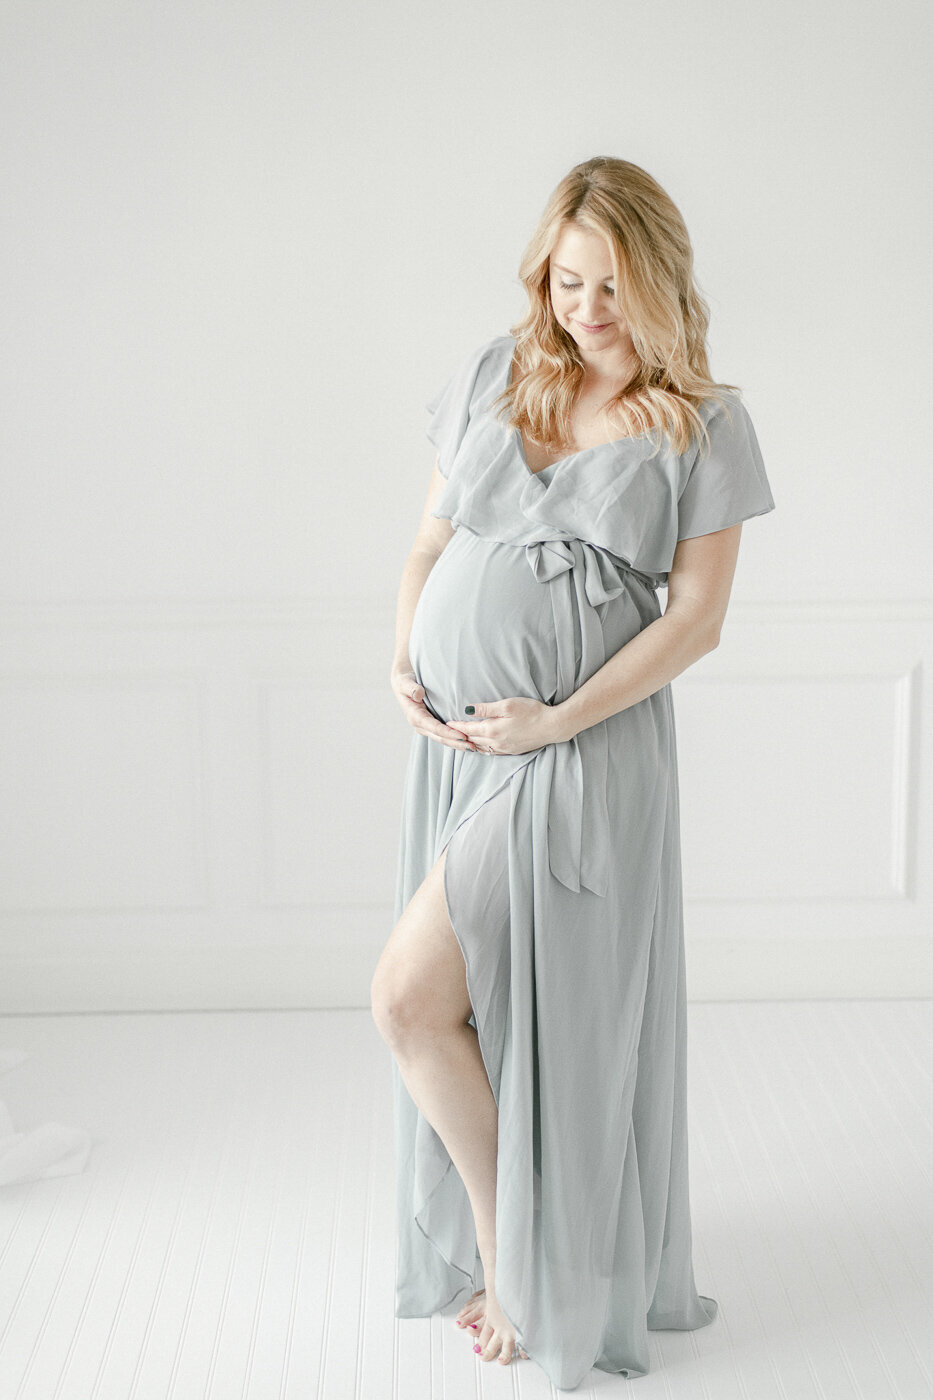 Pregnant woman in a blue maxi dress stands in a  white studio By Nashville maternity photographer Kristie Lloyd